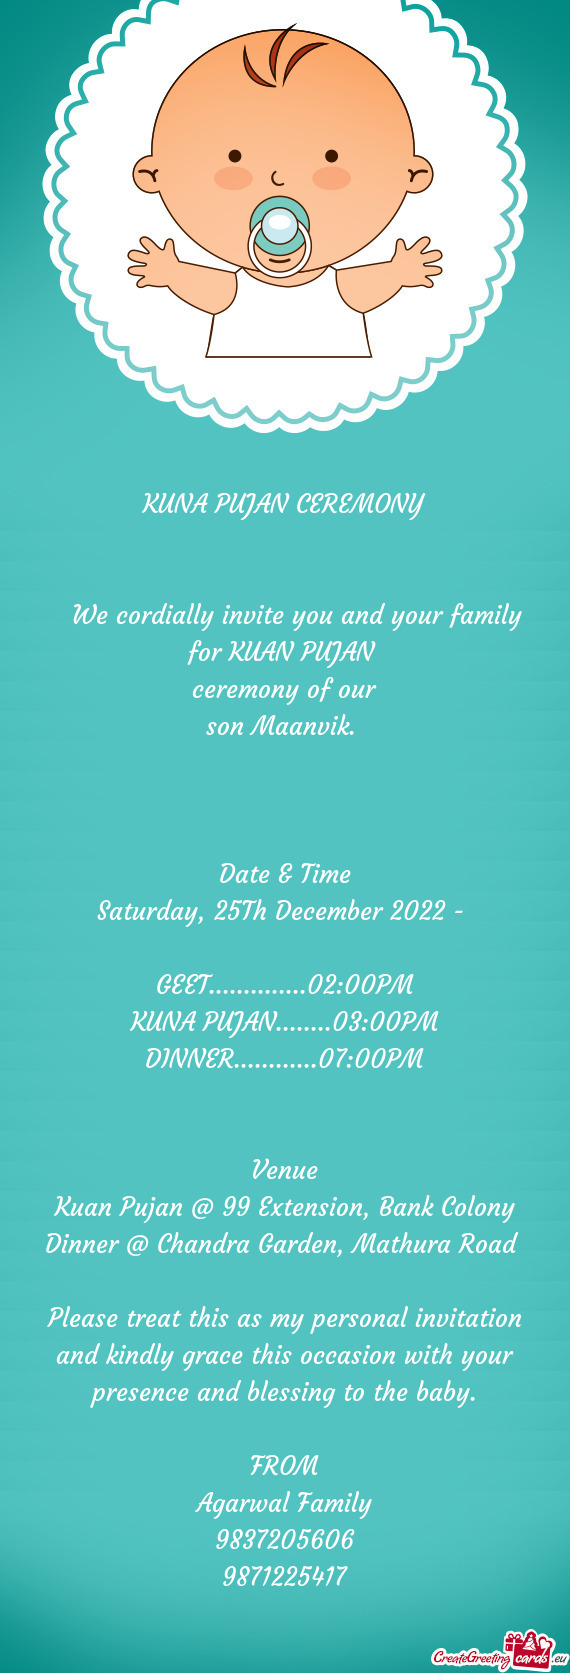 We cordially invite you and your family for KUAN PUJAN